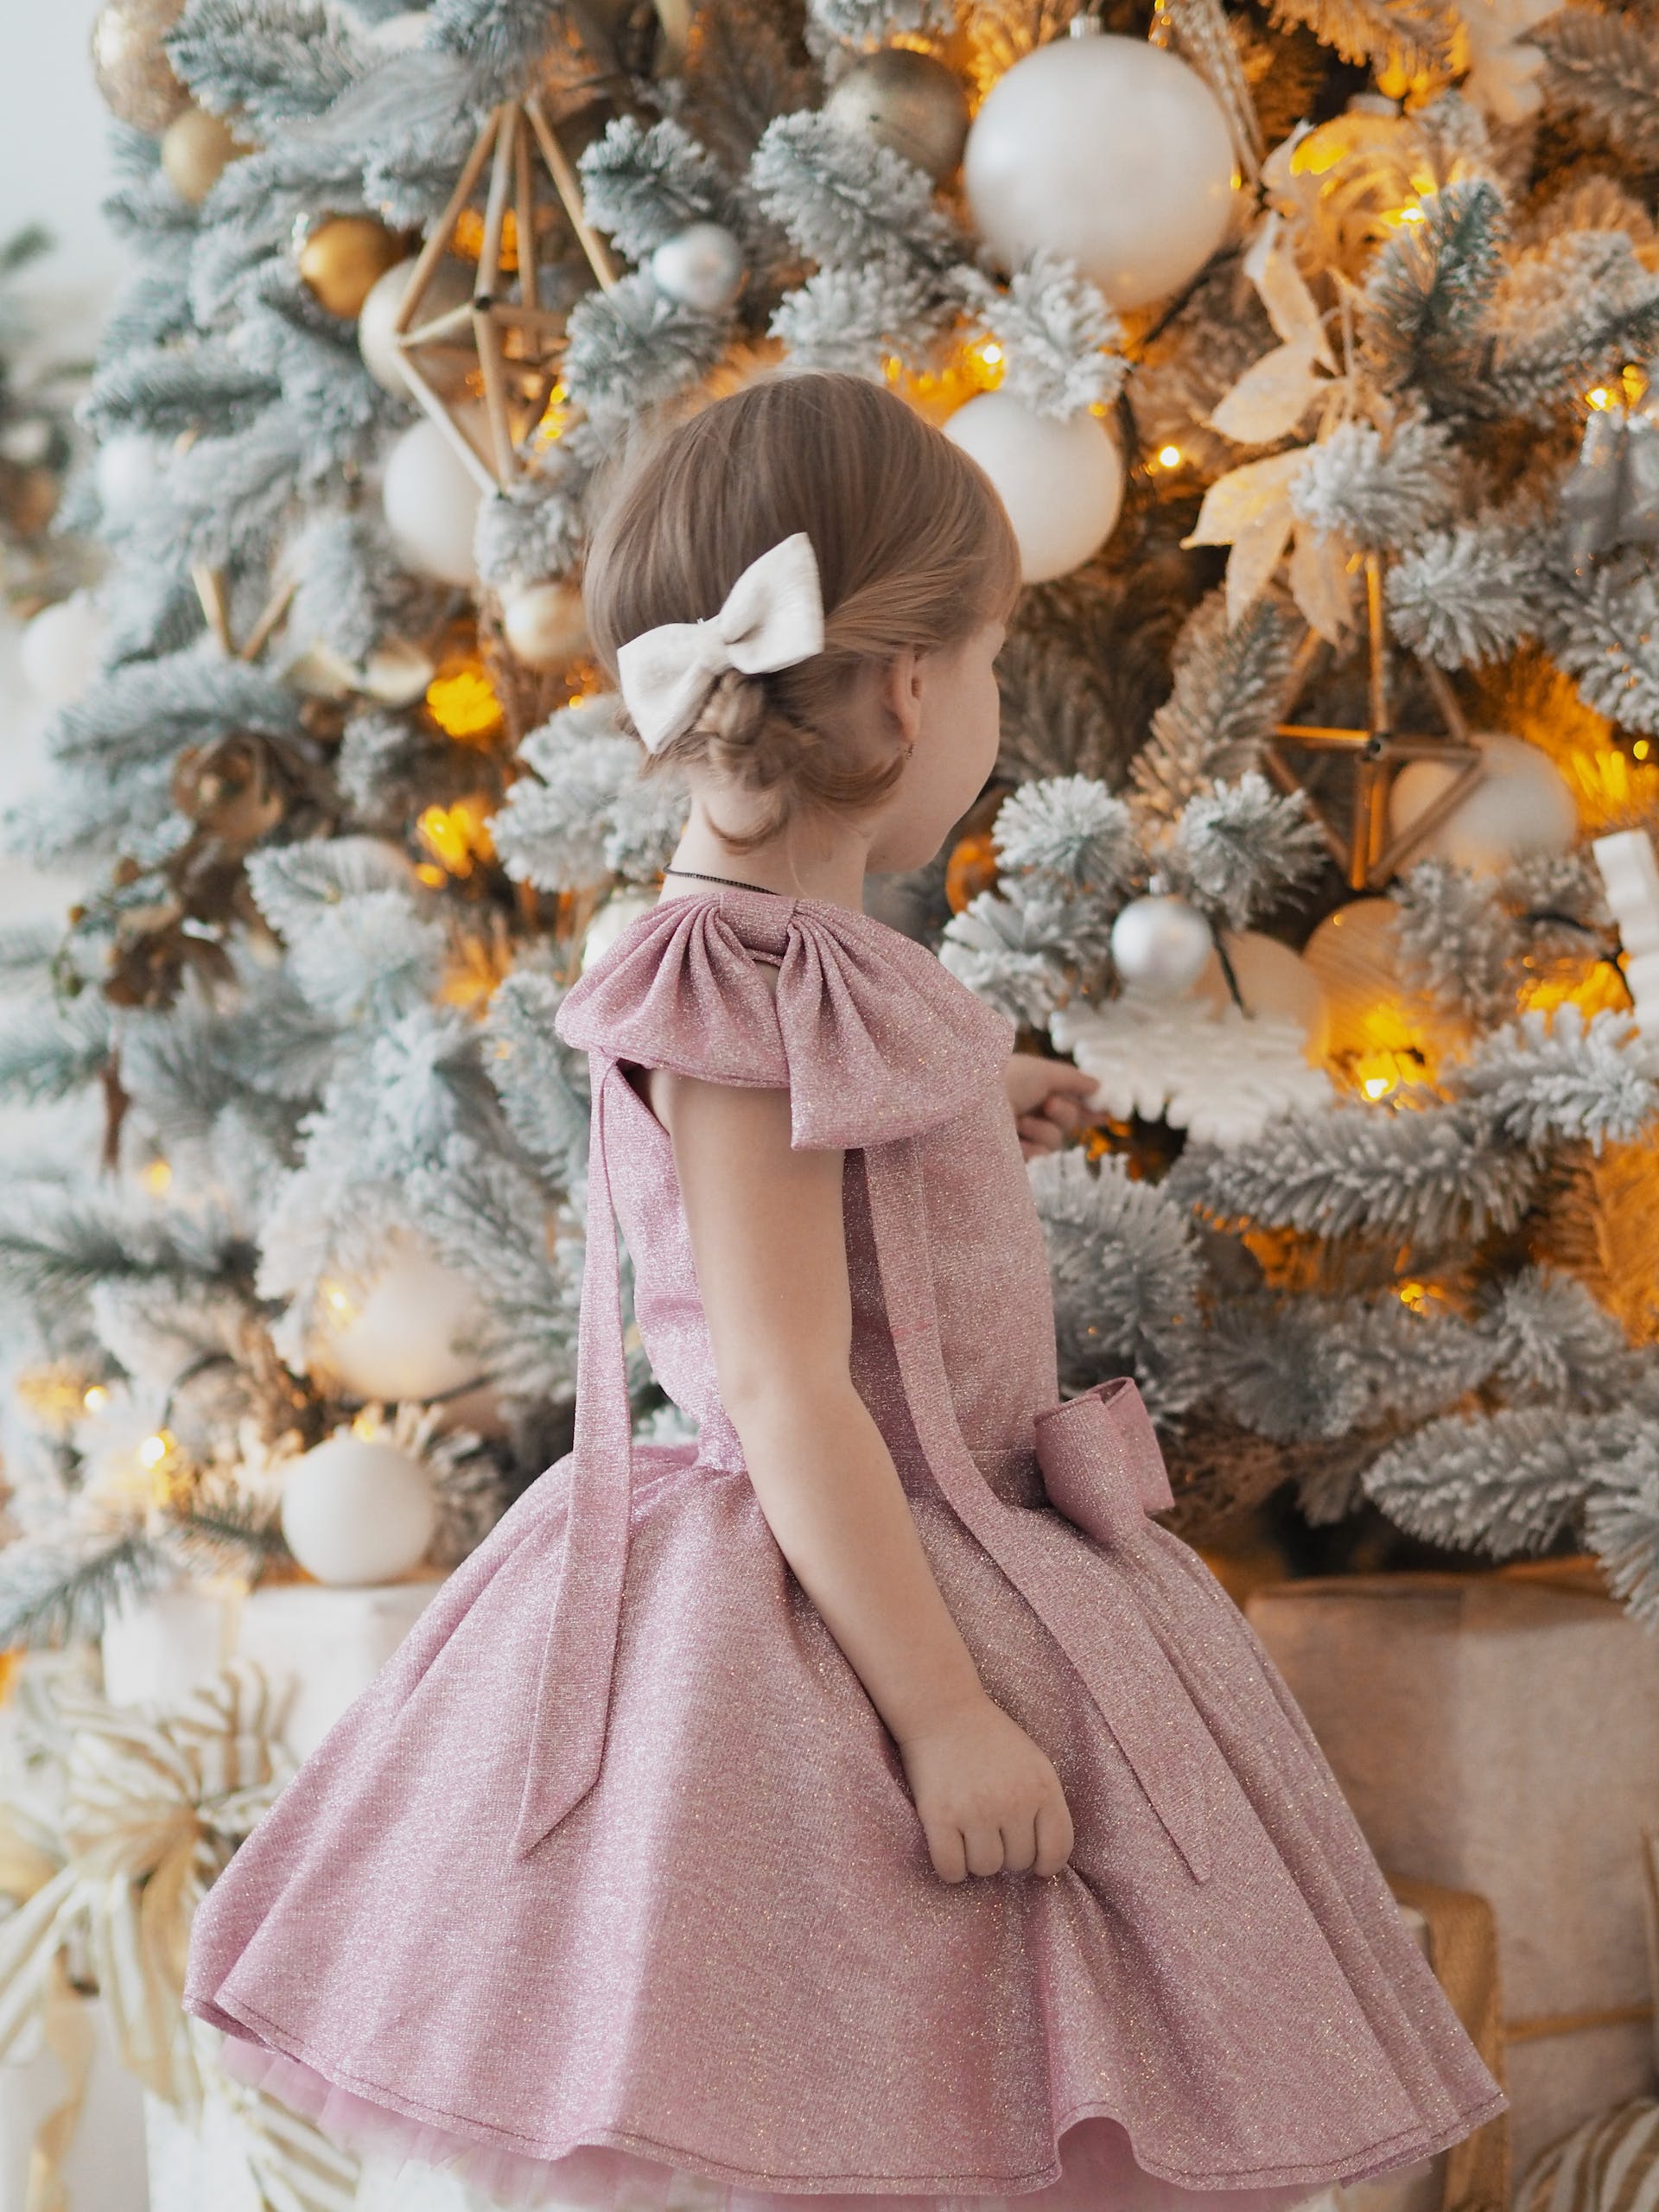 A little girl looking at a Christmas tree | Source: Pexels